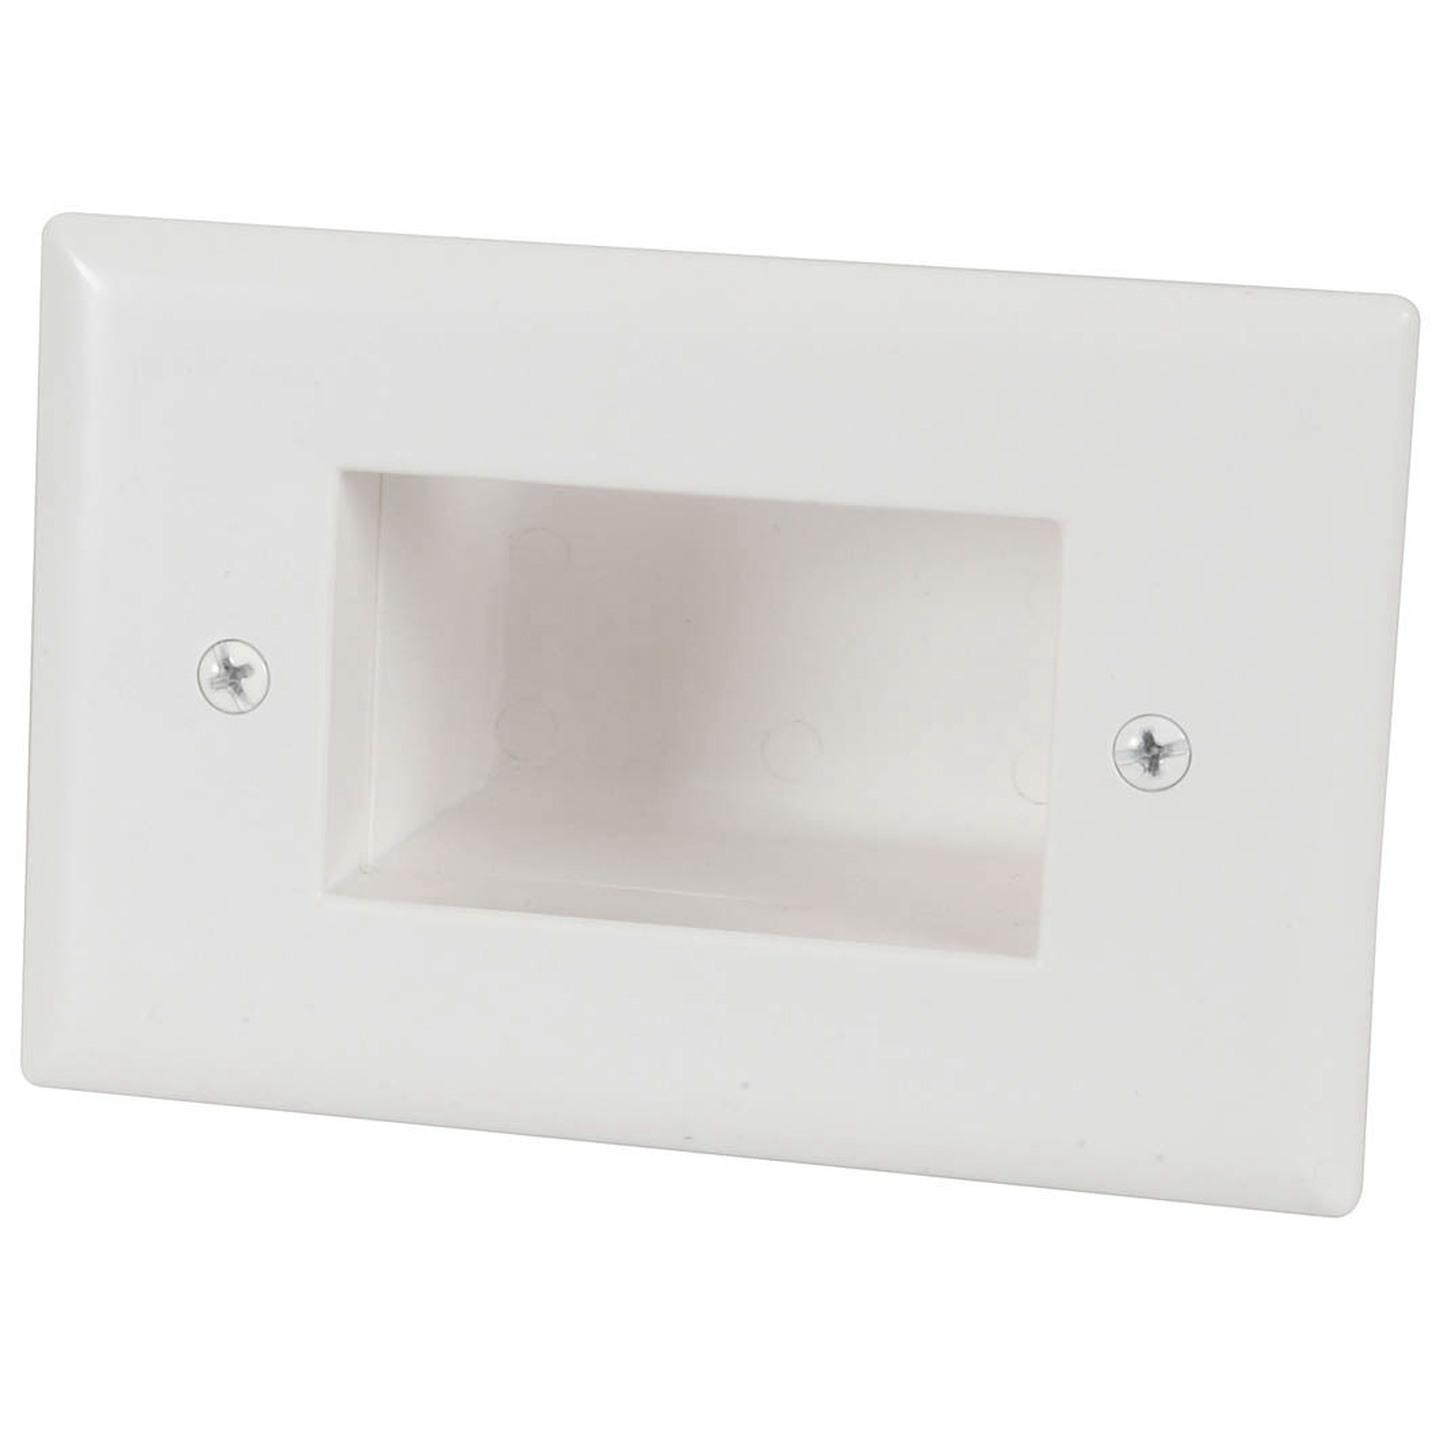 Recessed Cable Entry Wall Plate - Large